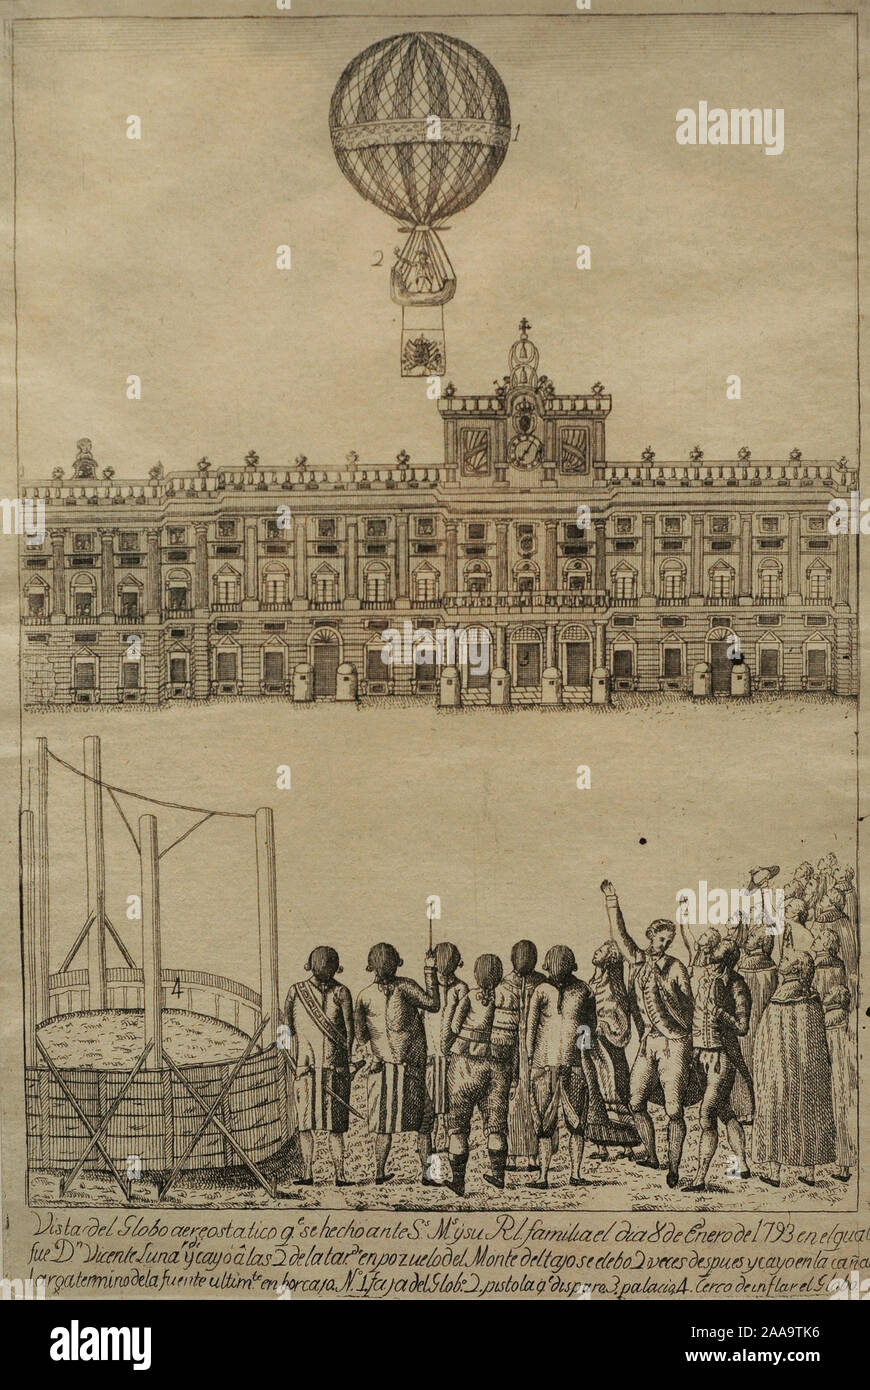 History of Air Transport. 18th century. Balloon test flight by Vicente Lunardi (1754-1806) before King Charles IV and the entire royal family, on January 8, 1793. Etching on paper by Jose Rodriguez. History Museum. Madrid. Spain. Stock Photo